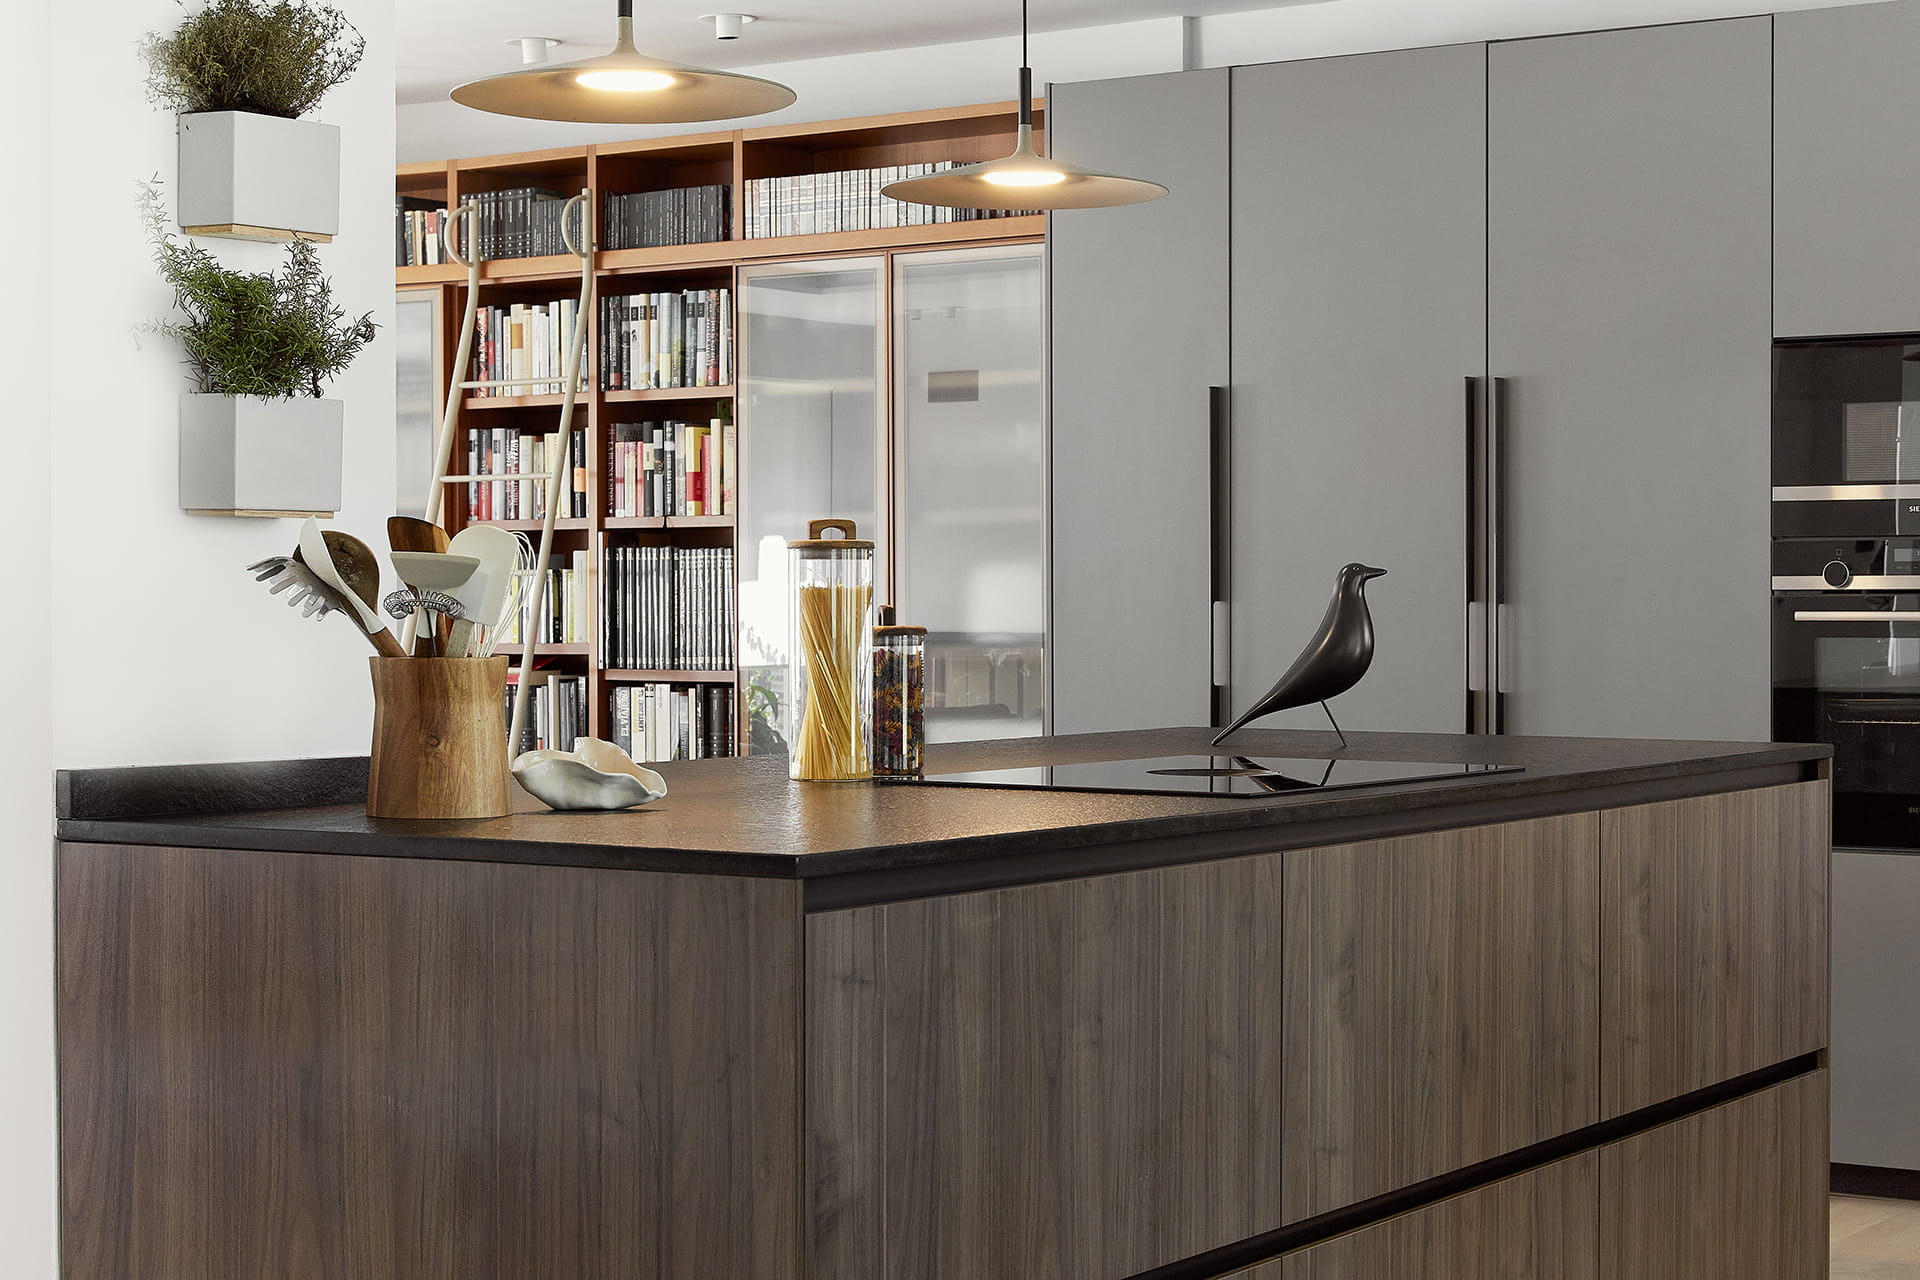 Grey and wood Santos kitchen with island, bright and open-plan, integrated into the daytime living area.